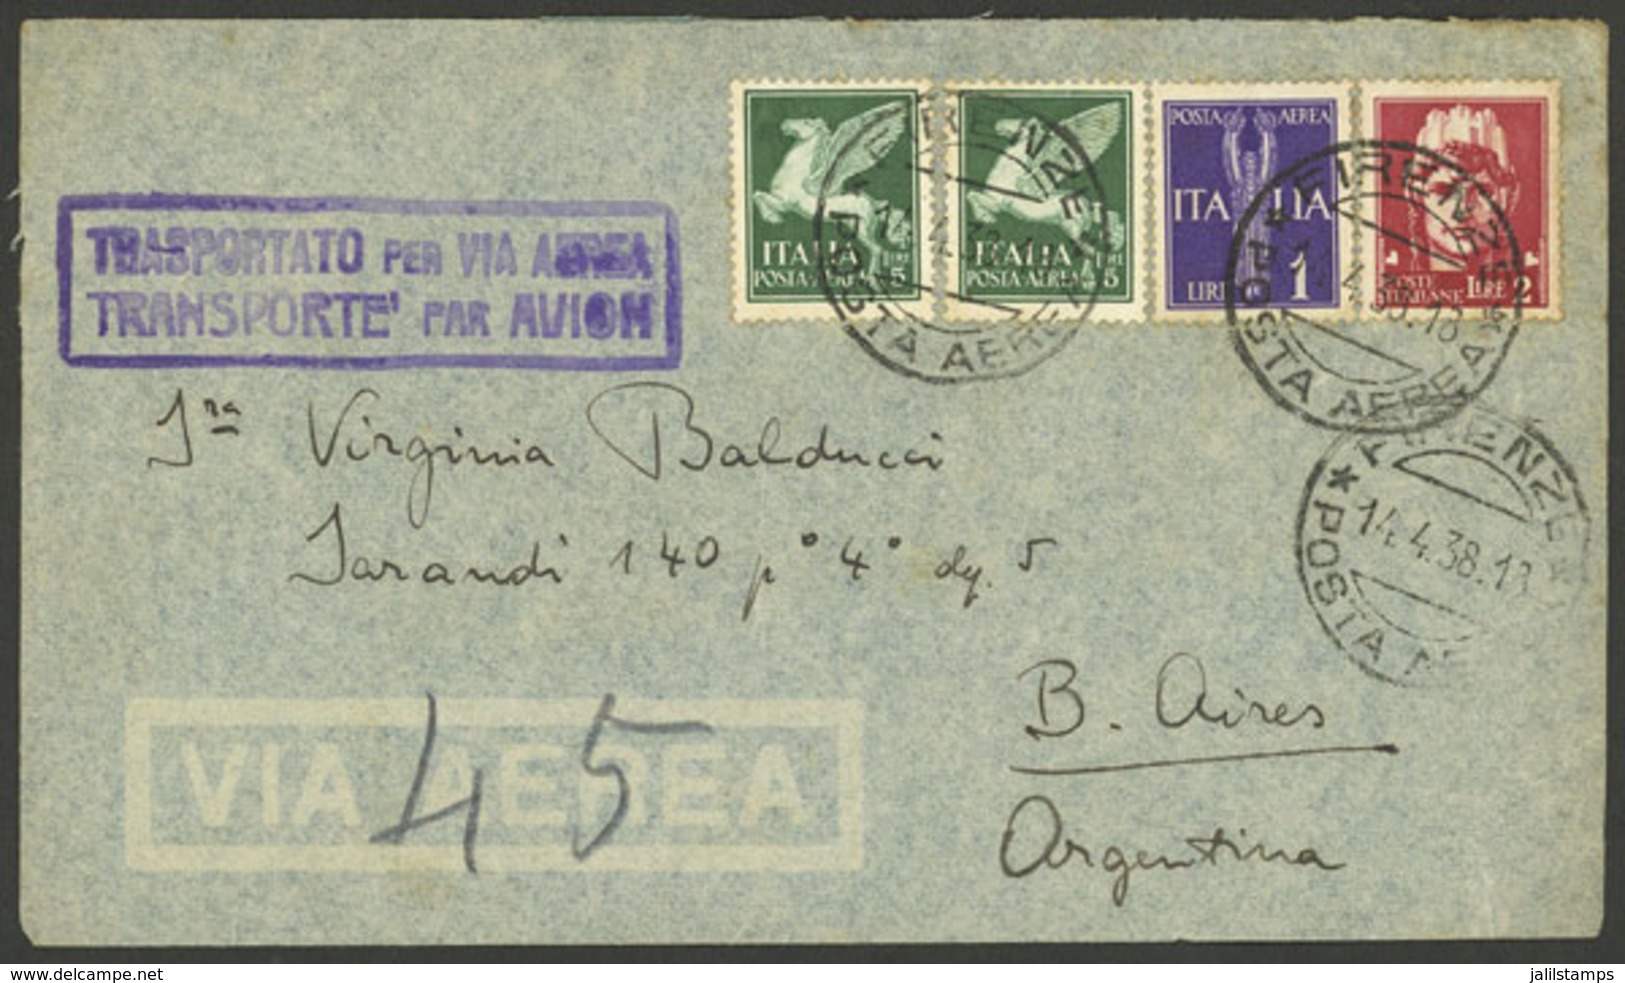 ITALY: 14/AP/1938 Firenze - Argentina, Airmail Cover Franked With 13L., Very Nice! - Ohne Zuordnung